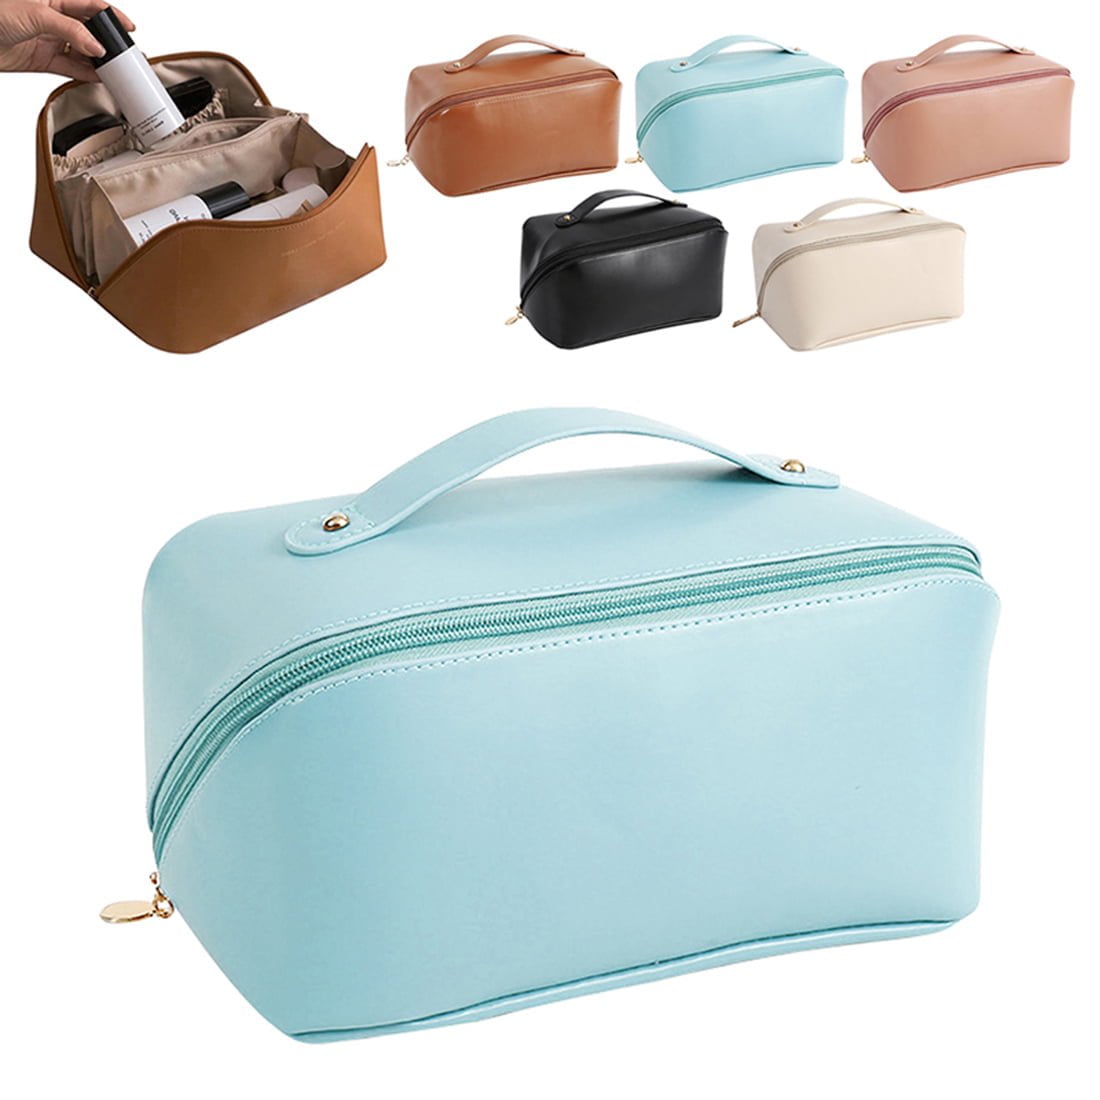 Makeup Bag,Leather Double Layer Large Makeup Organizer Bag,Travel  Accessories Dorm Room Essentials Toiletry Bag for Women,Travel Essentials Cosmetic  Bag Makeup Case with Detachable Divider for Brush 